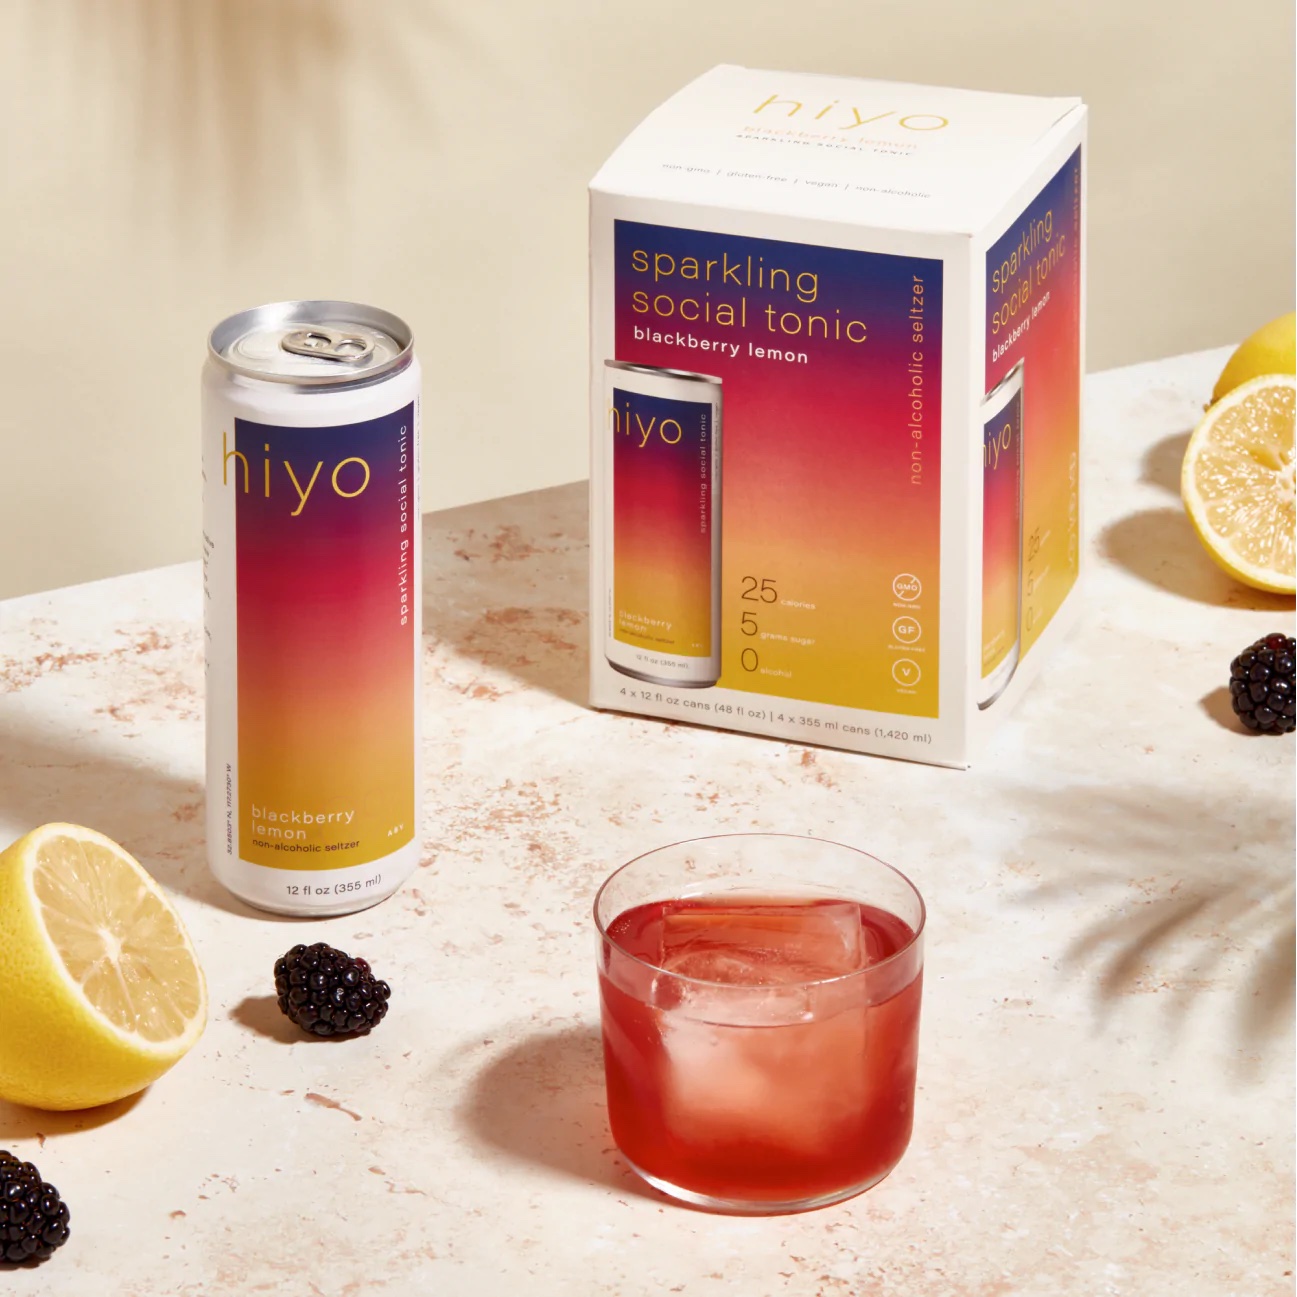 A box of hiyo blackberry lemon tonic with a can next to it, and a glass of the tonic with a large ice cube and a blackberry on the table.